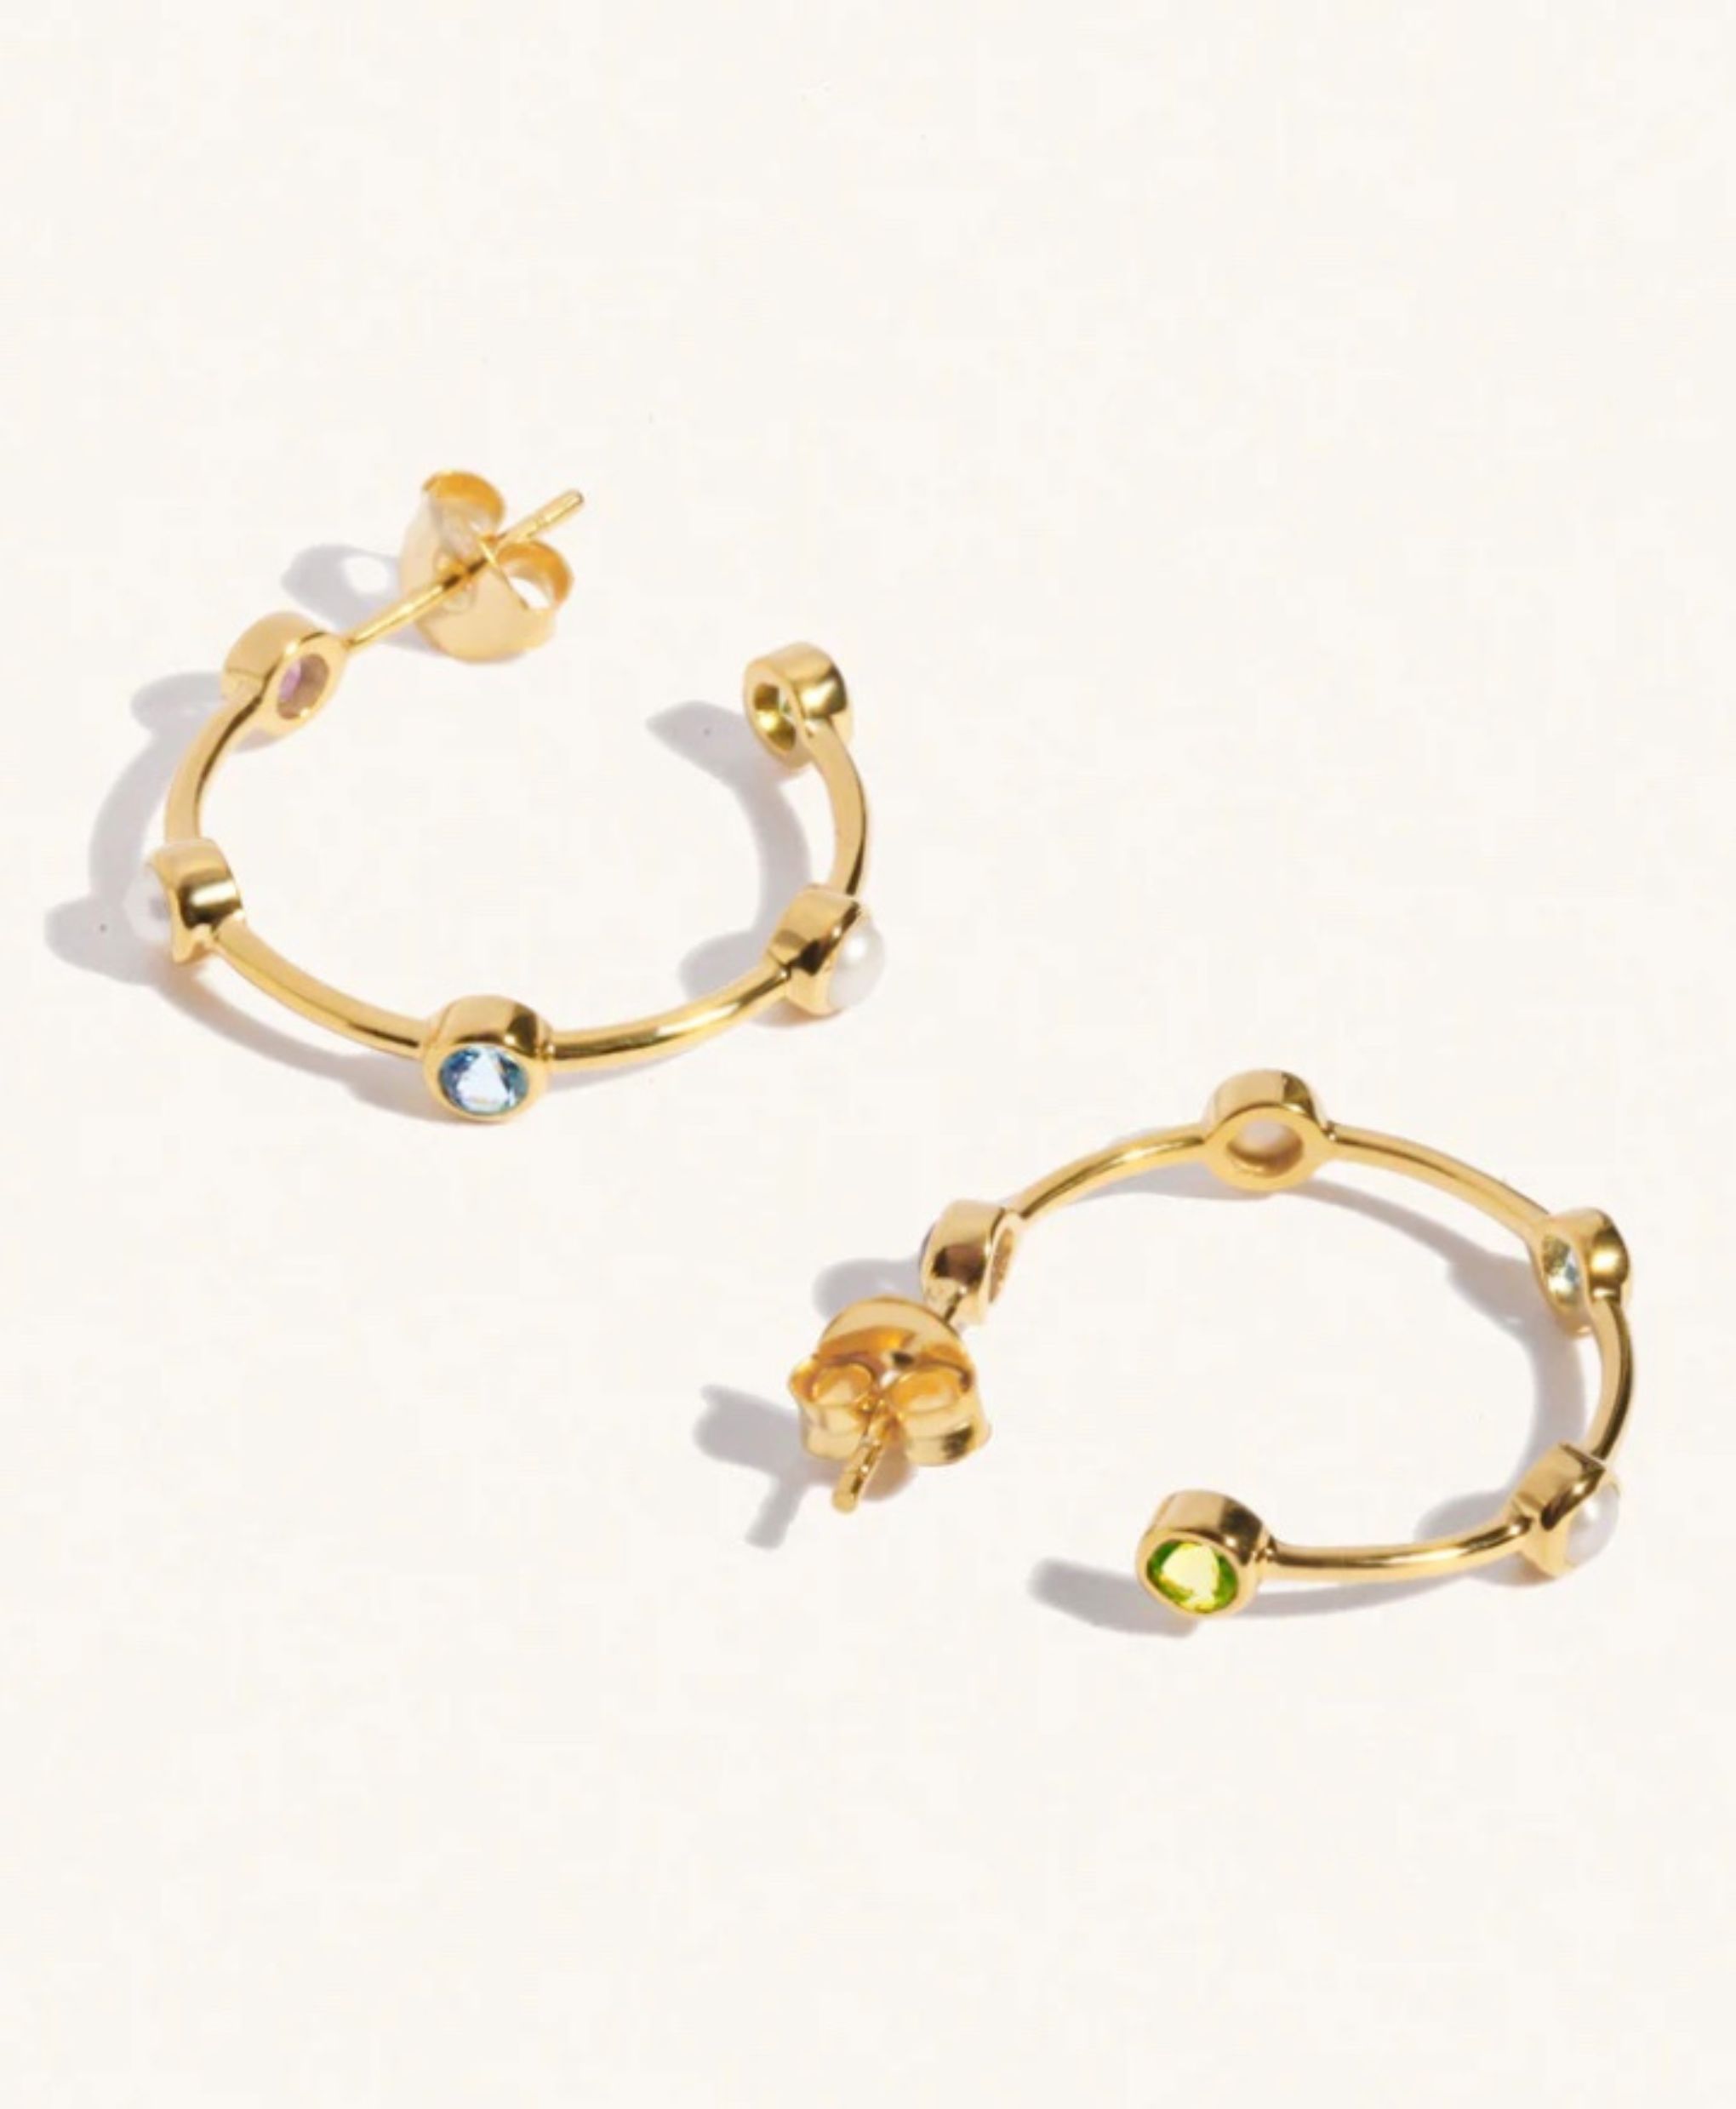 Athena Stone and Pearl Gold Hoops